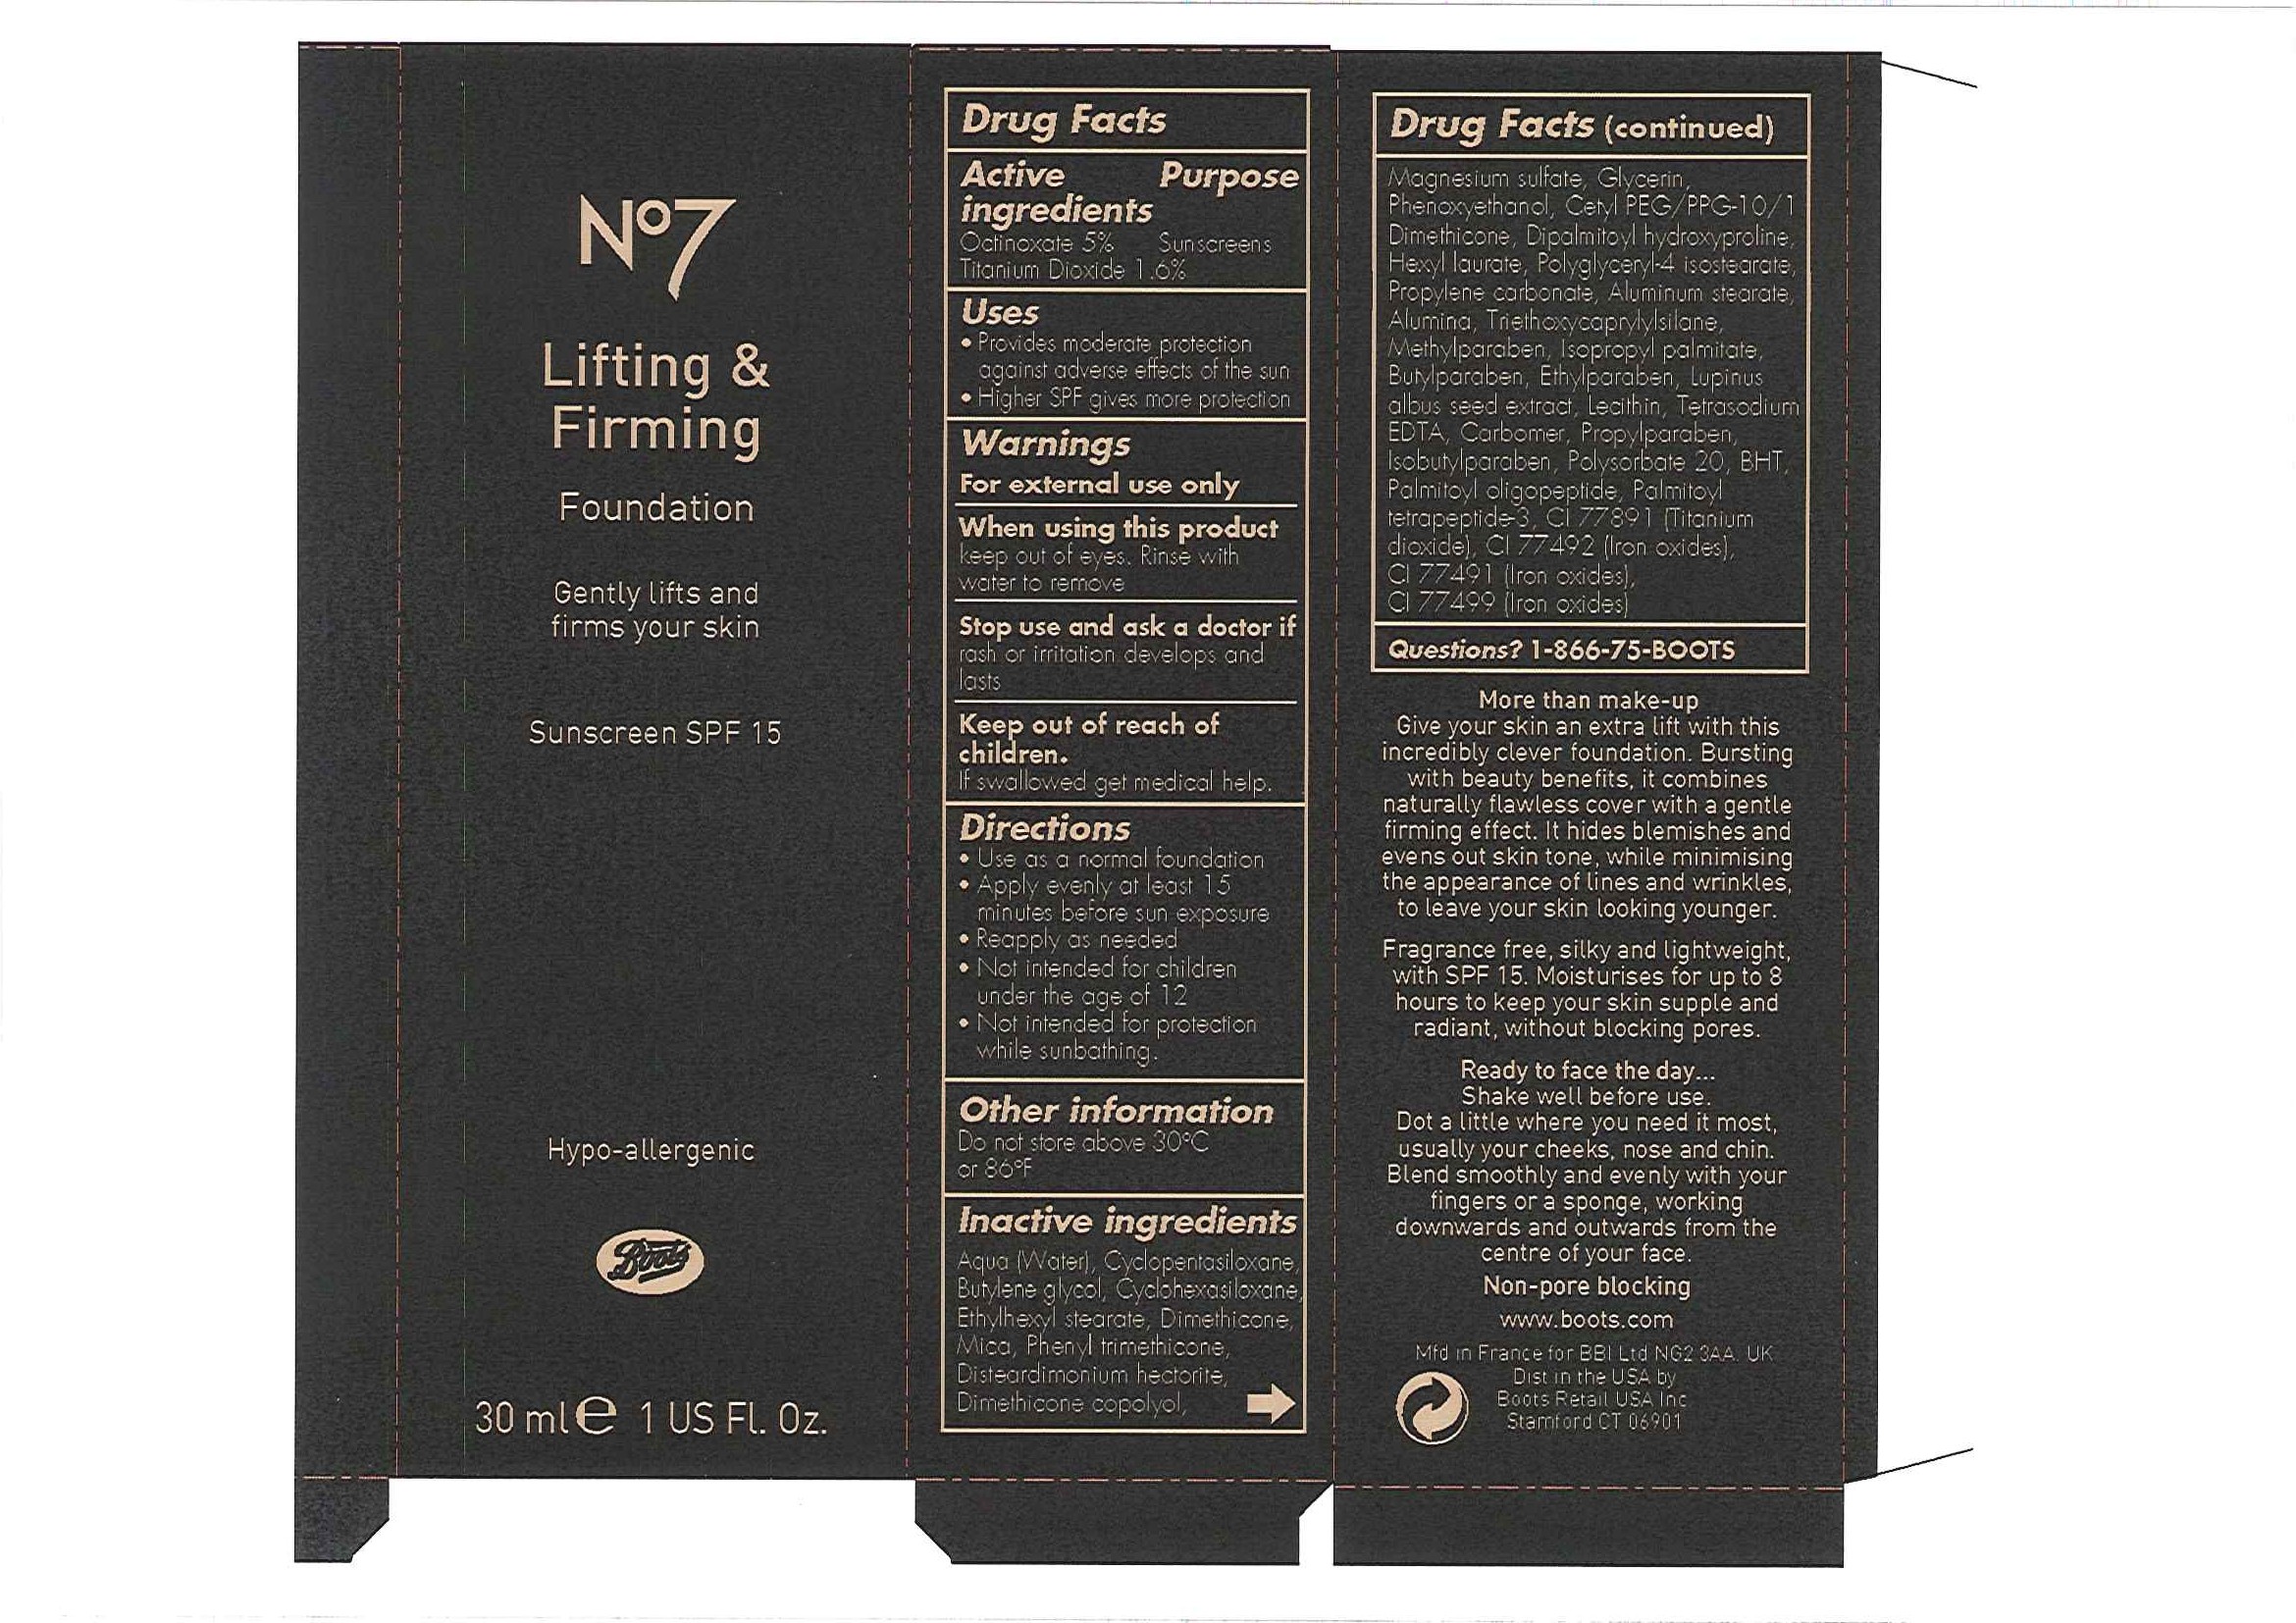 Lifting and Firming Fnd Truffle carton